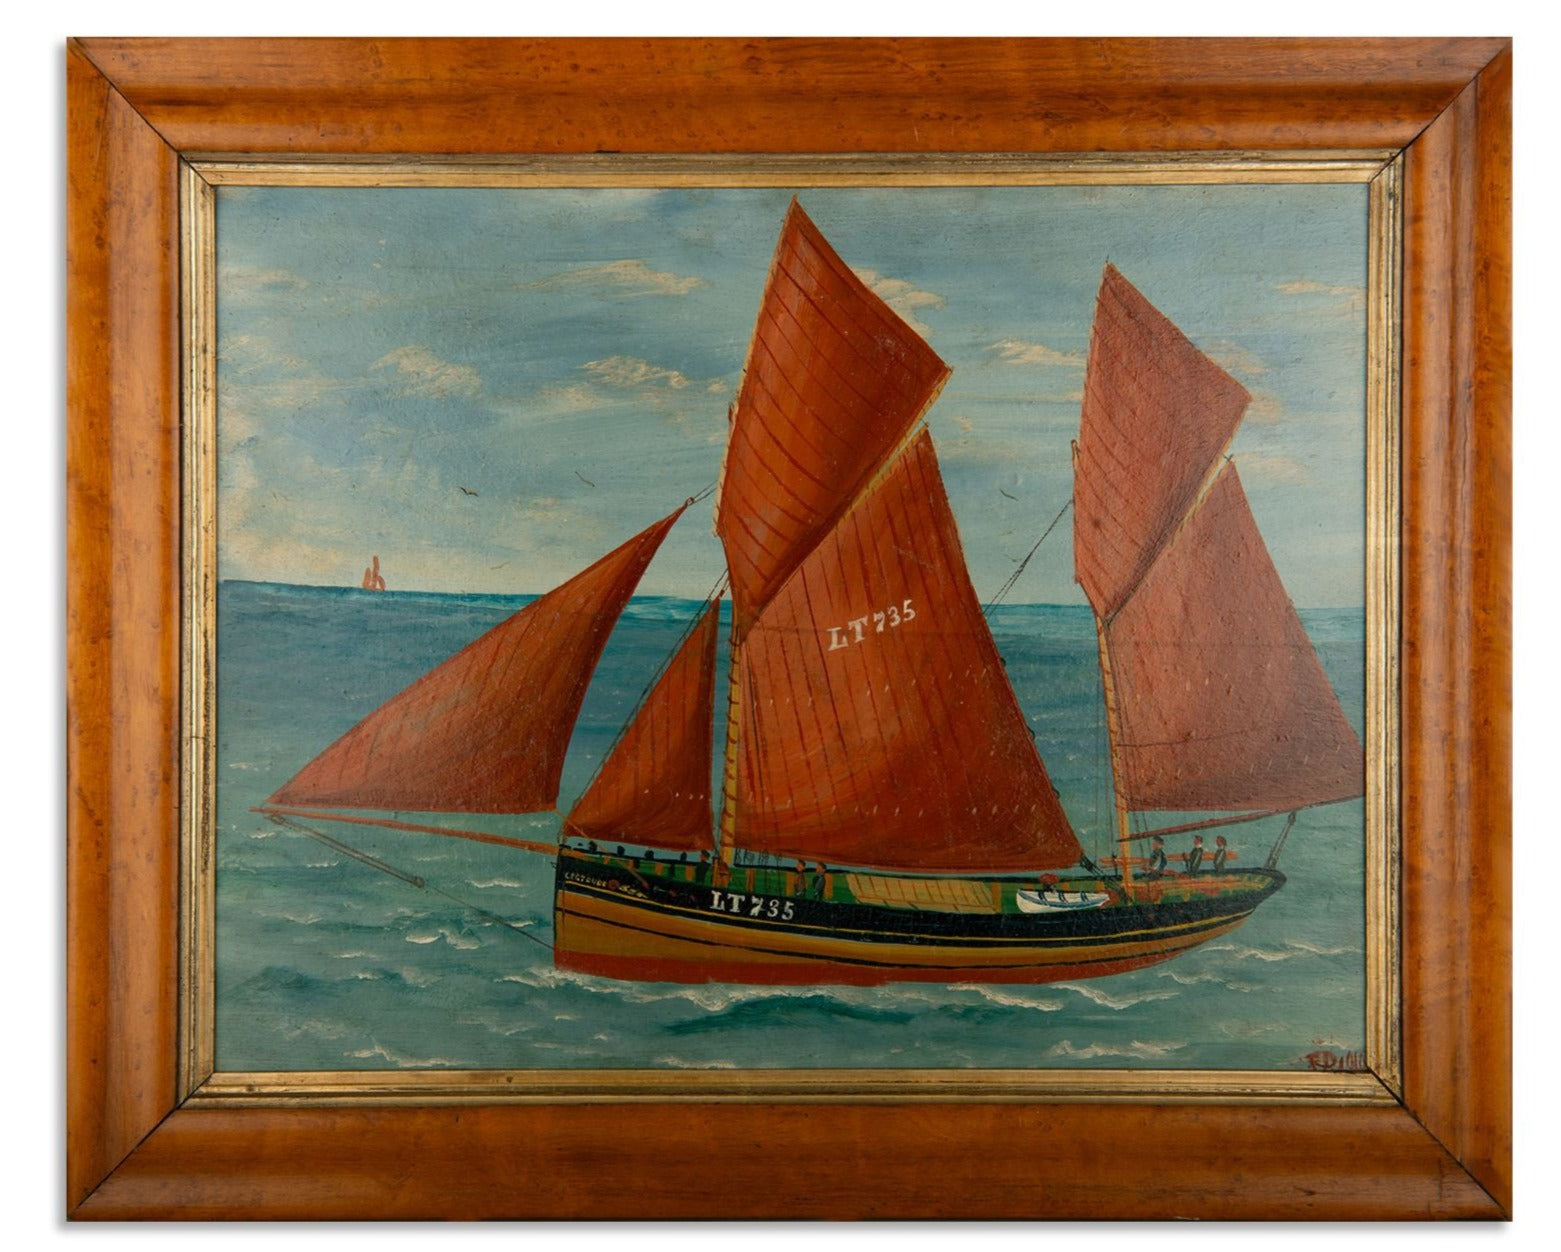 A Naive Pierhead Painting of Fishing Boat "Gertrude"